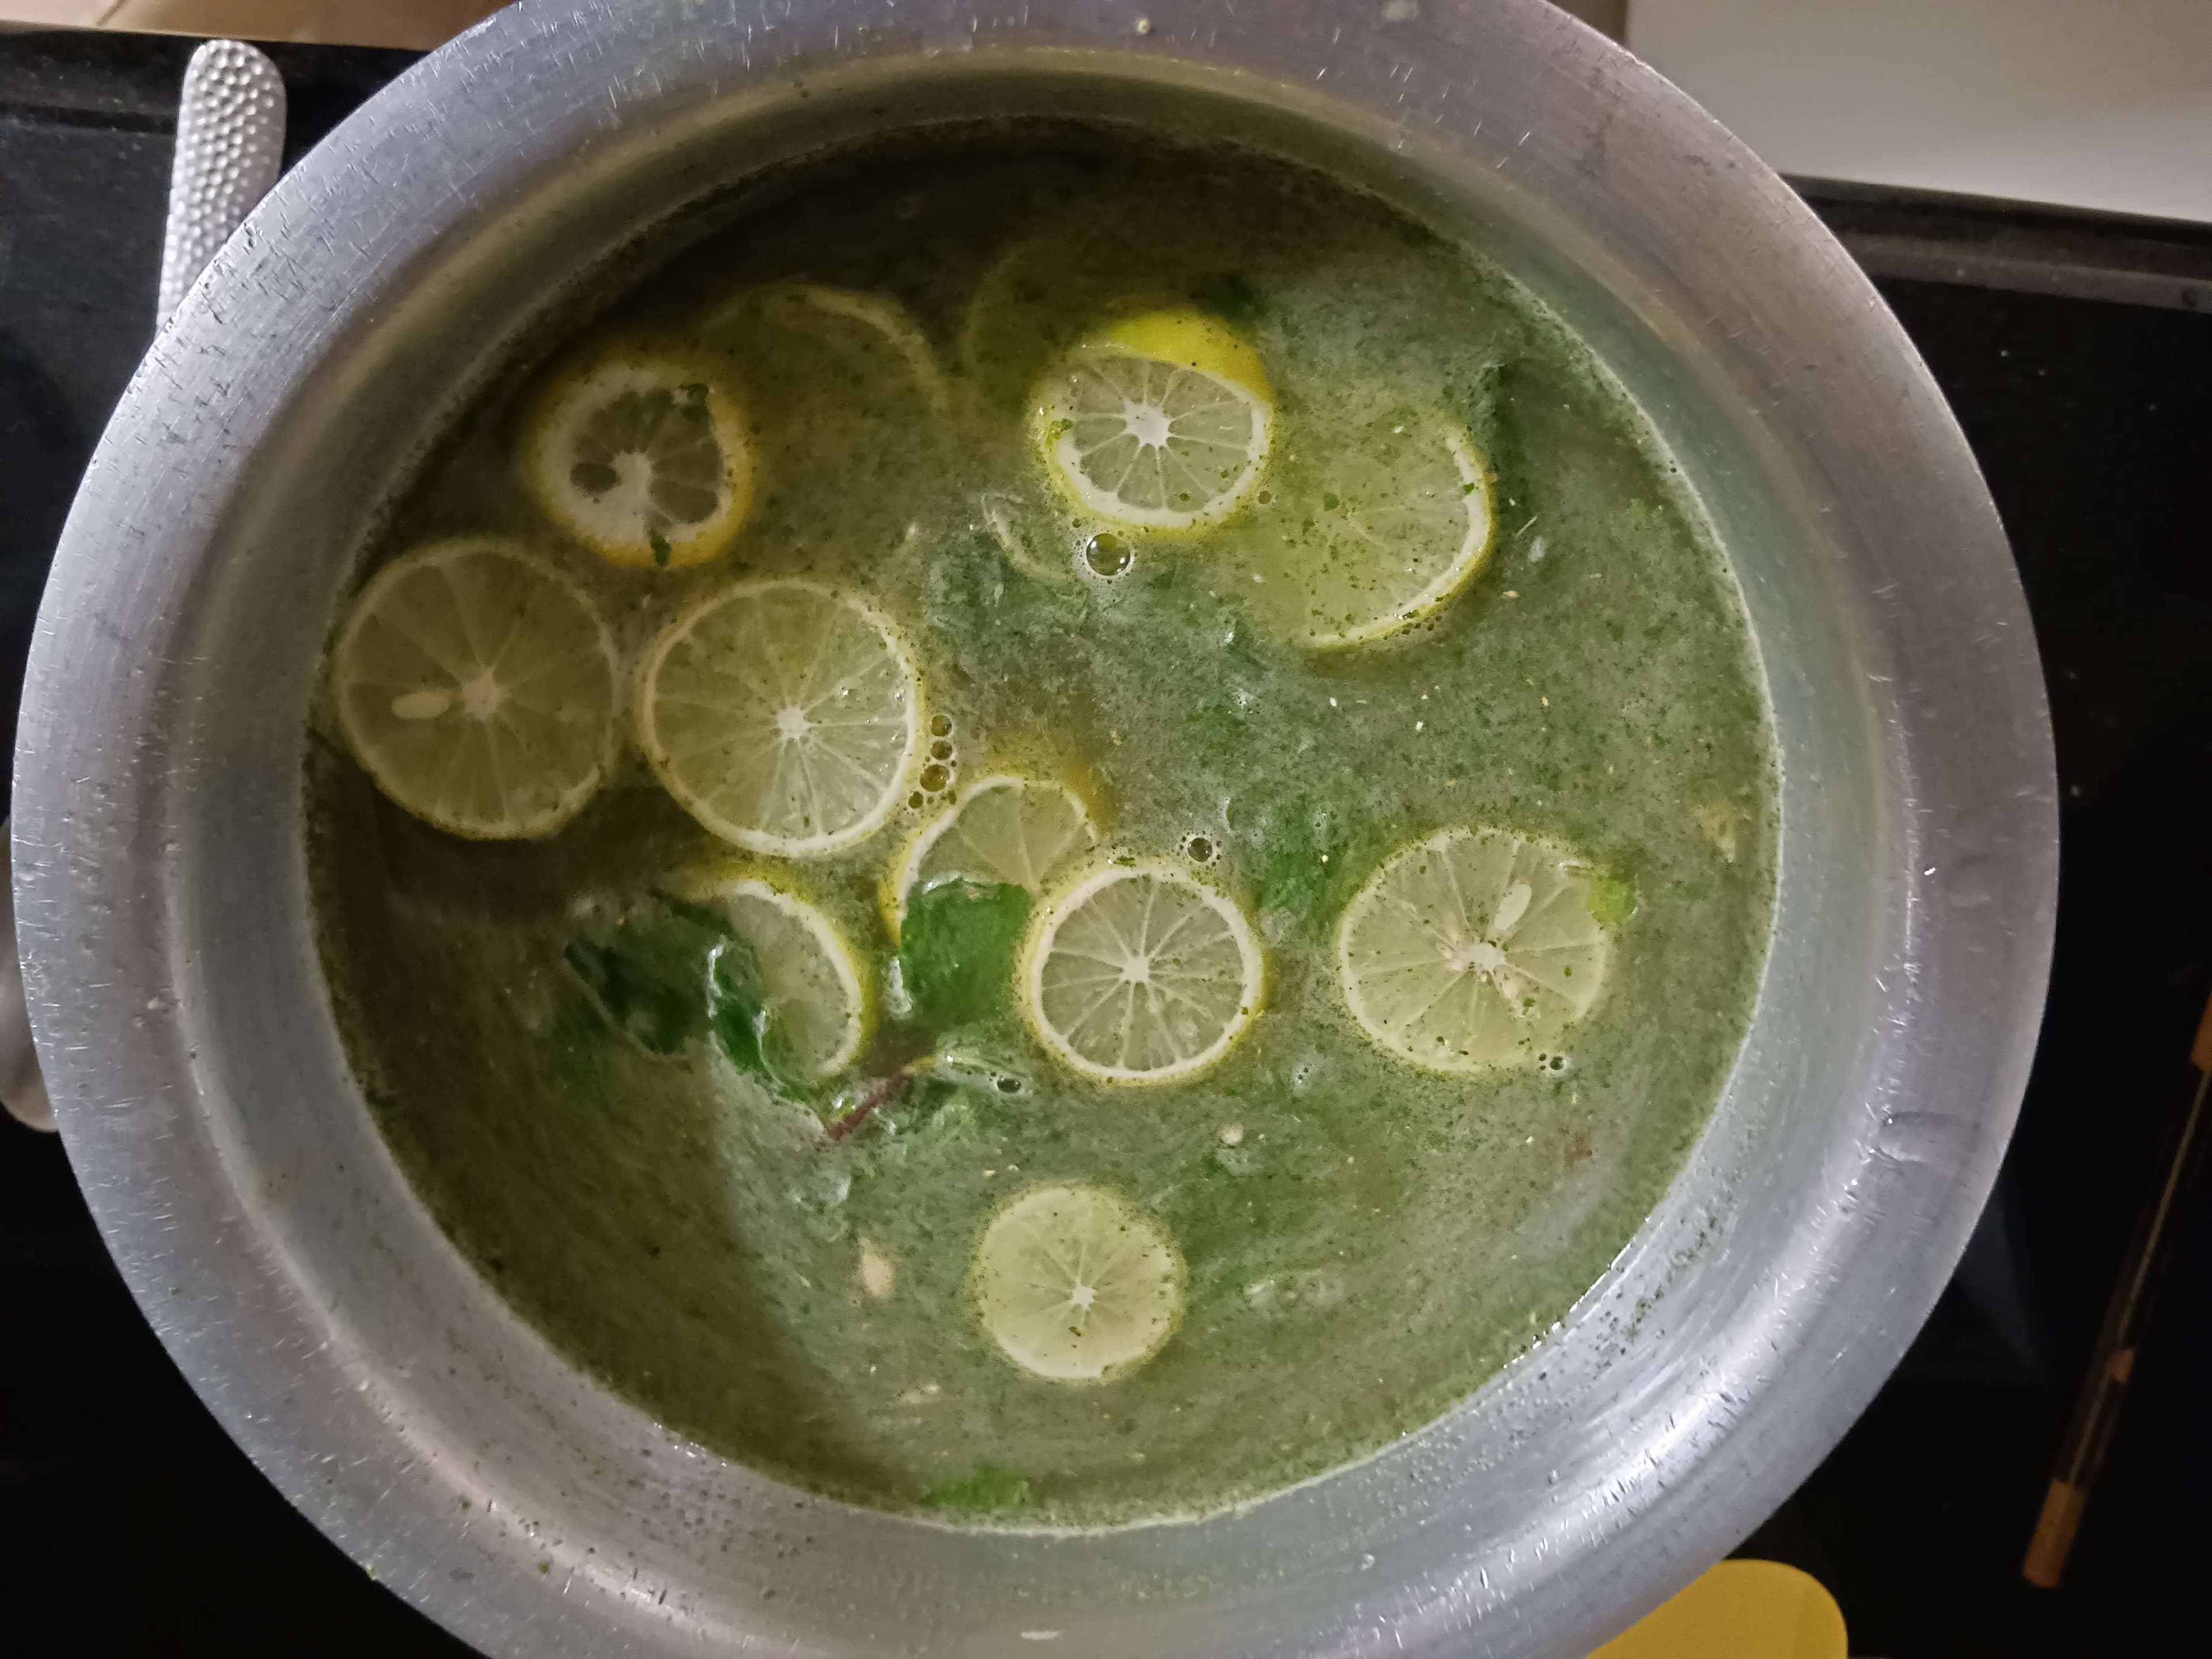 Tasty Lemonade Masala cooked by COOX chefs cooks during occasions parties events at home